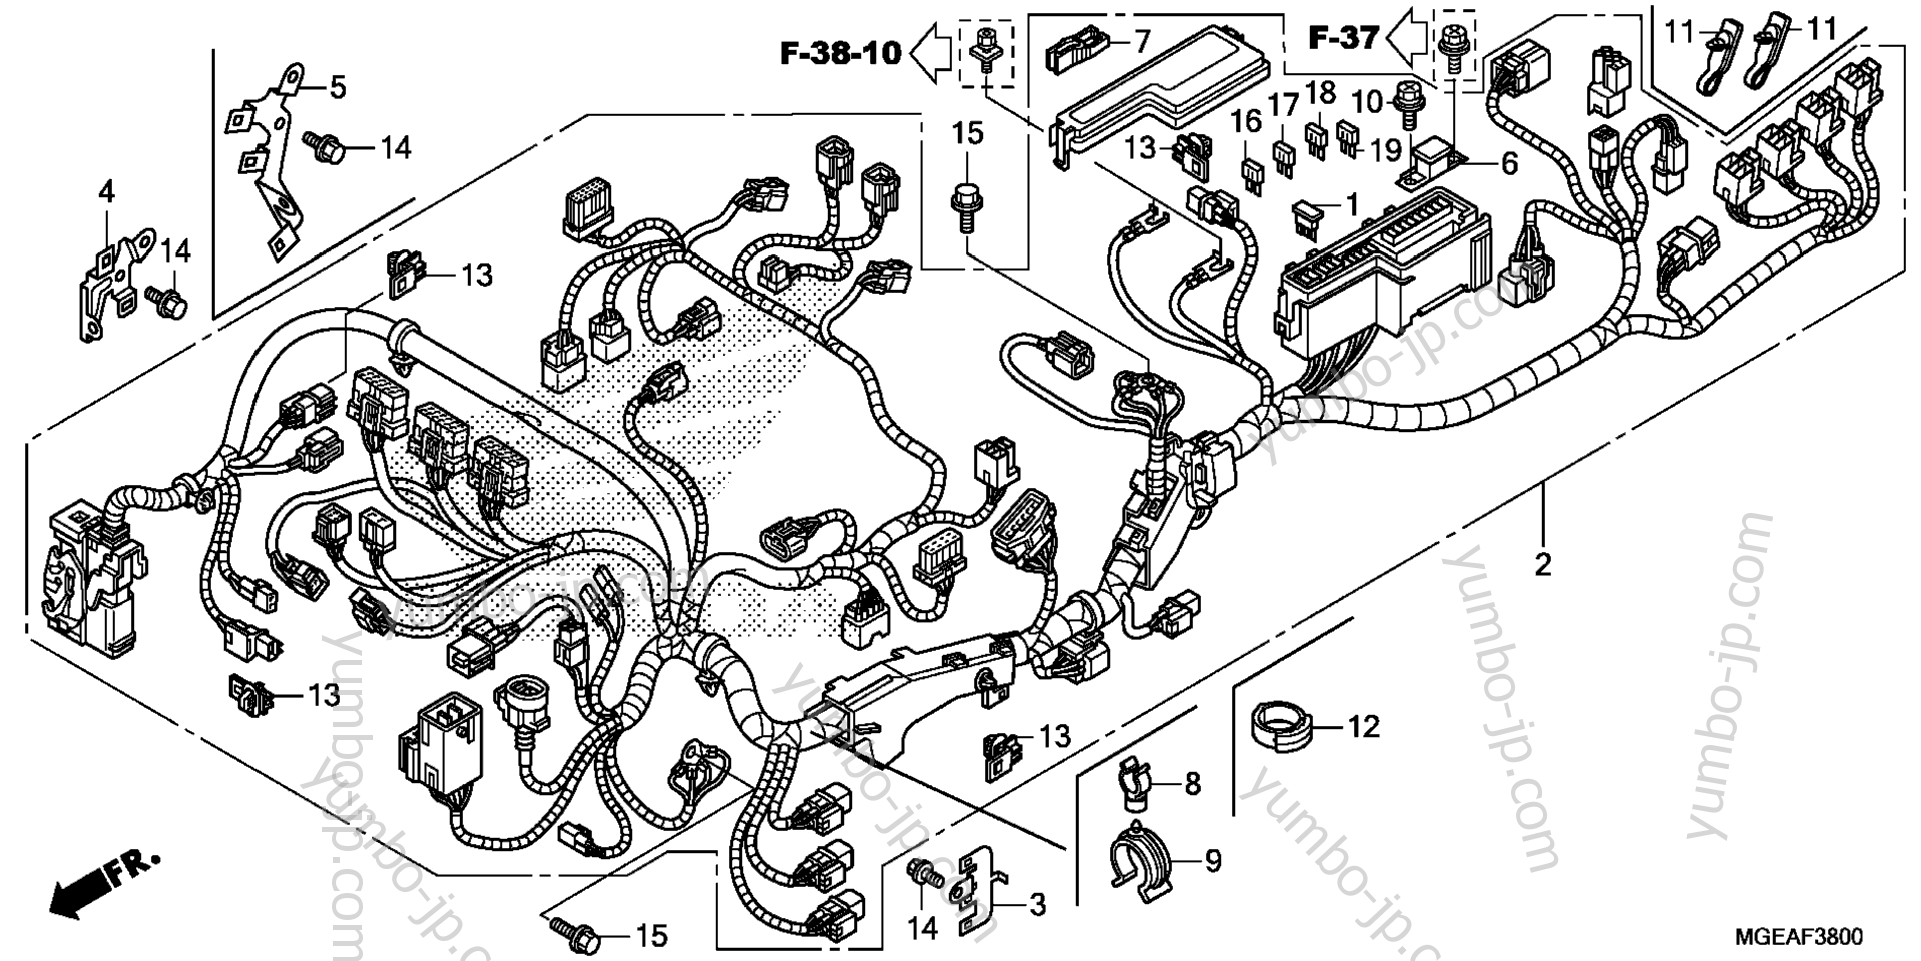 WIRE HARNESS for motorcycles HONDA VFR1200F AC 2014 year